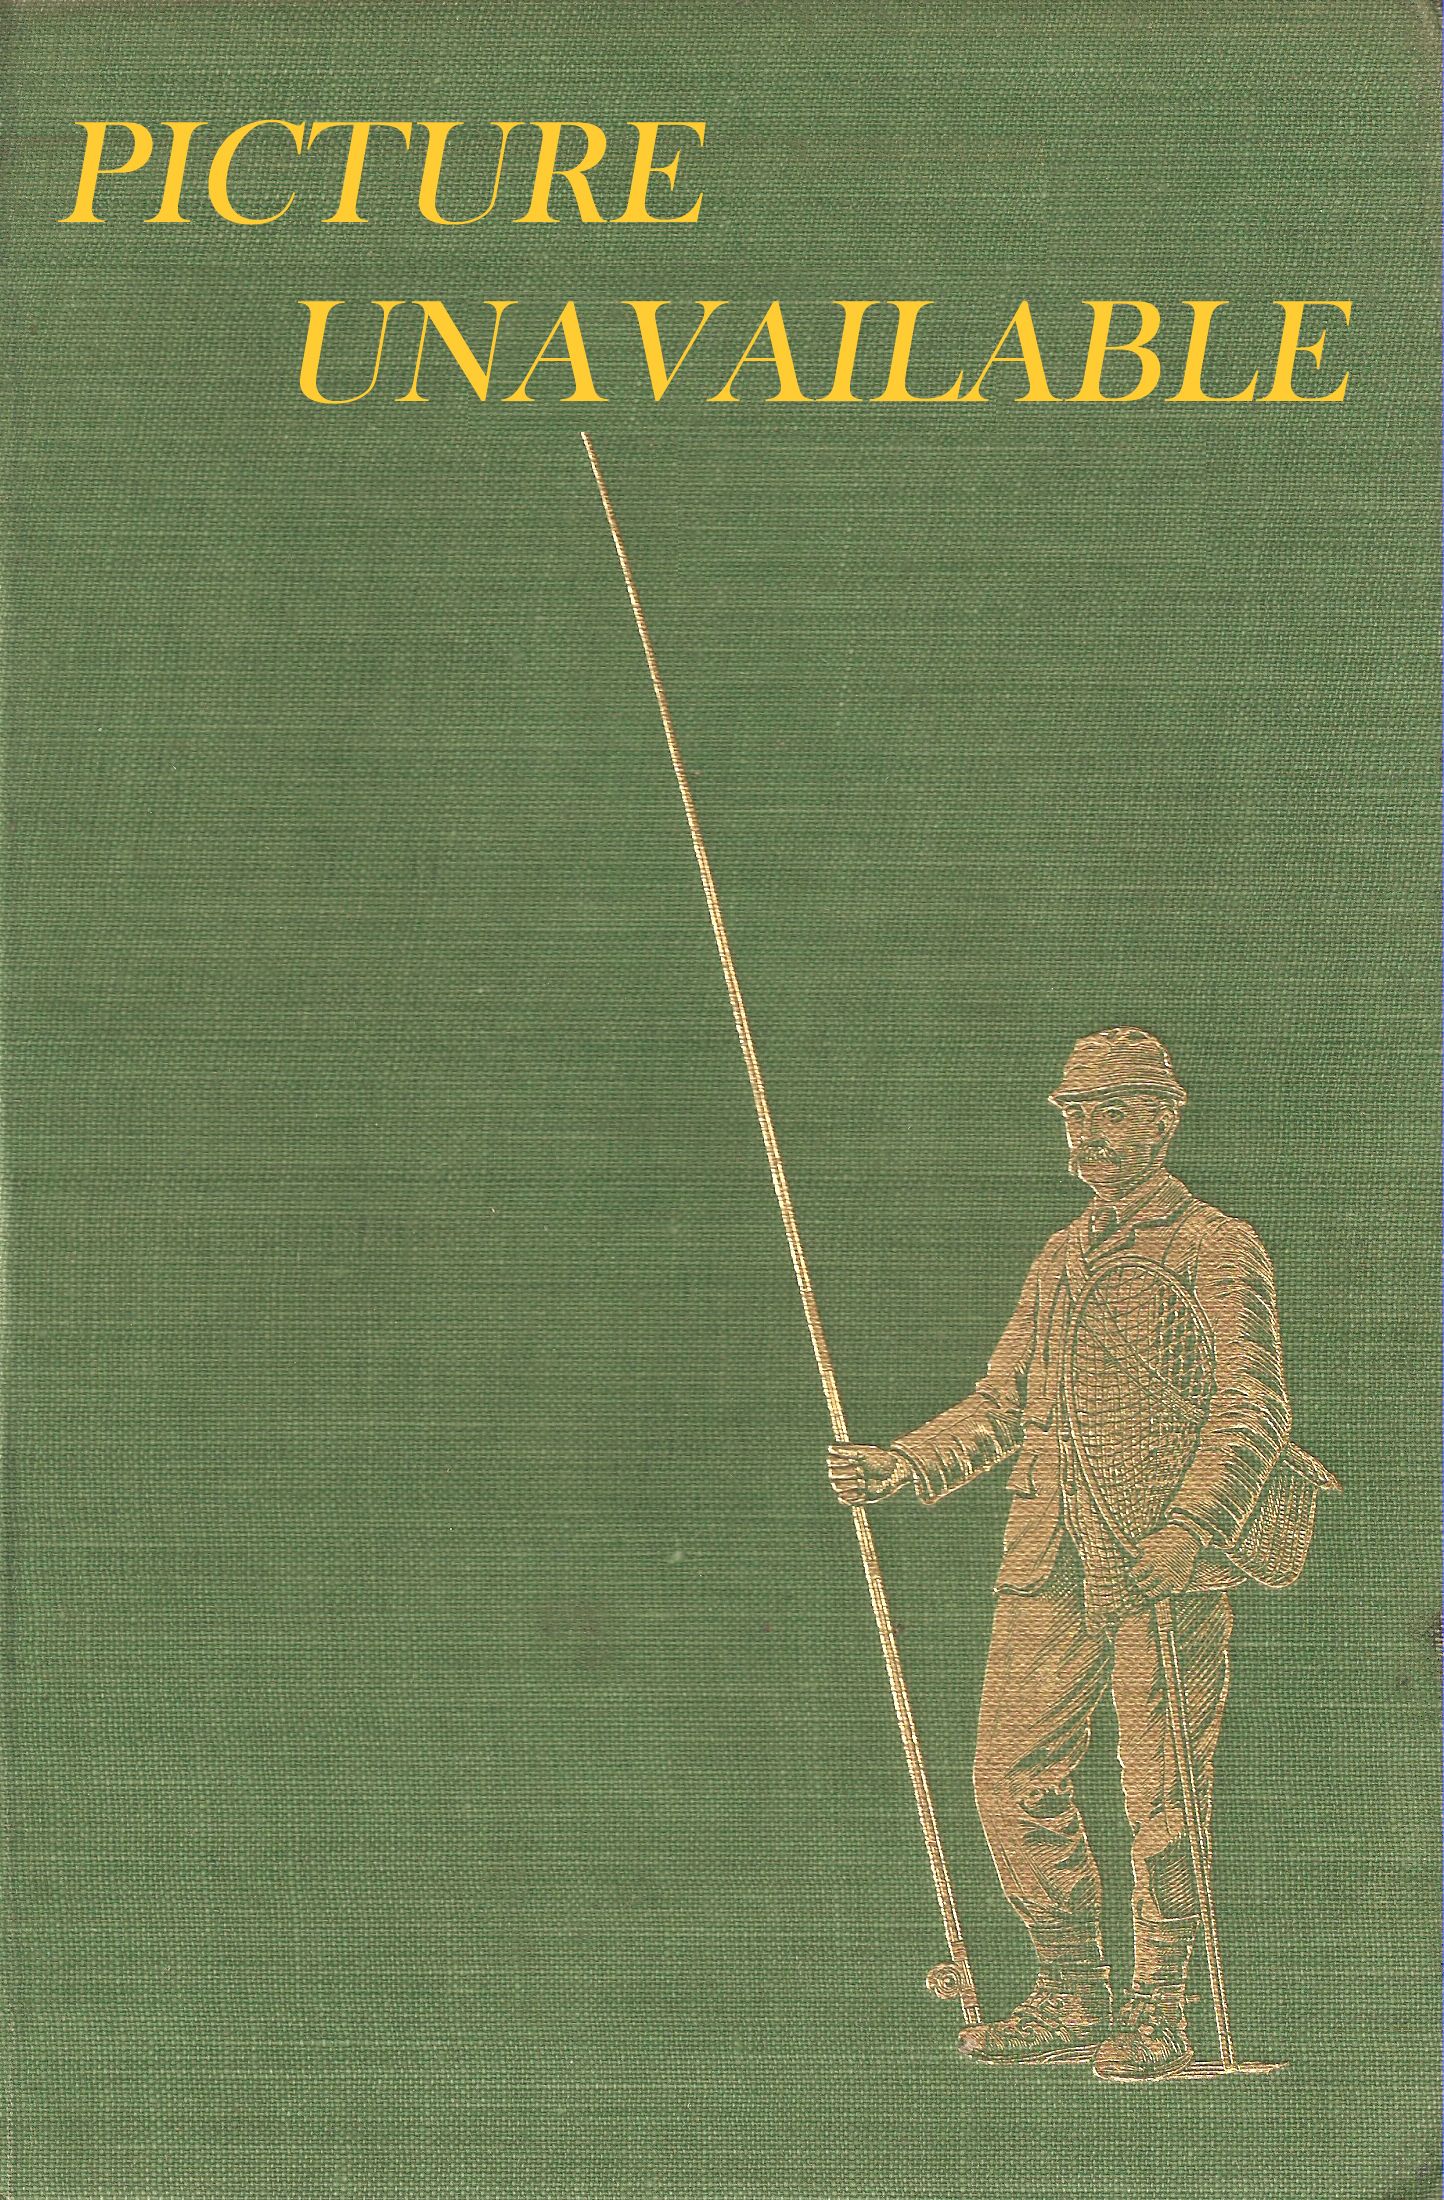 BASIC OPTICS FOR THE SPORTSMAN. By Earle B. Brown.